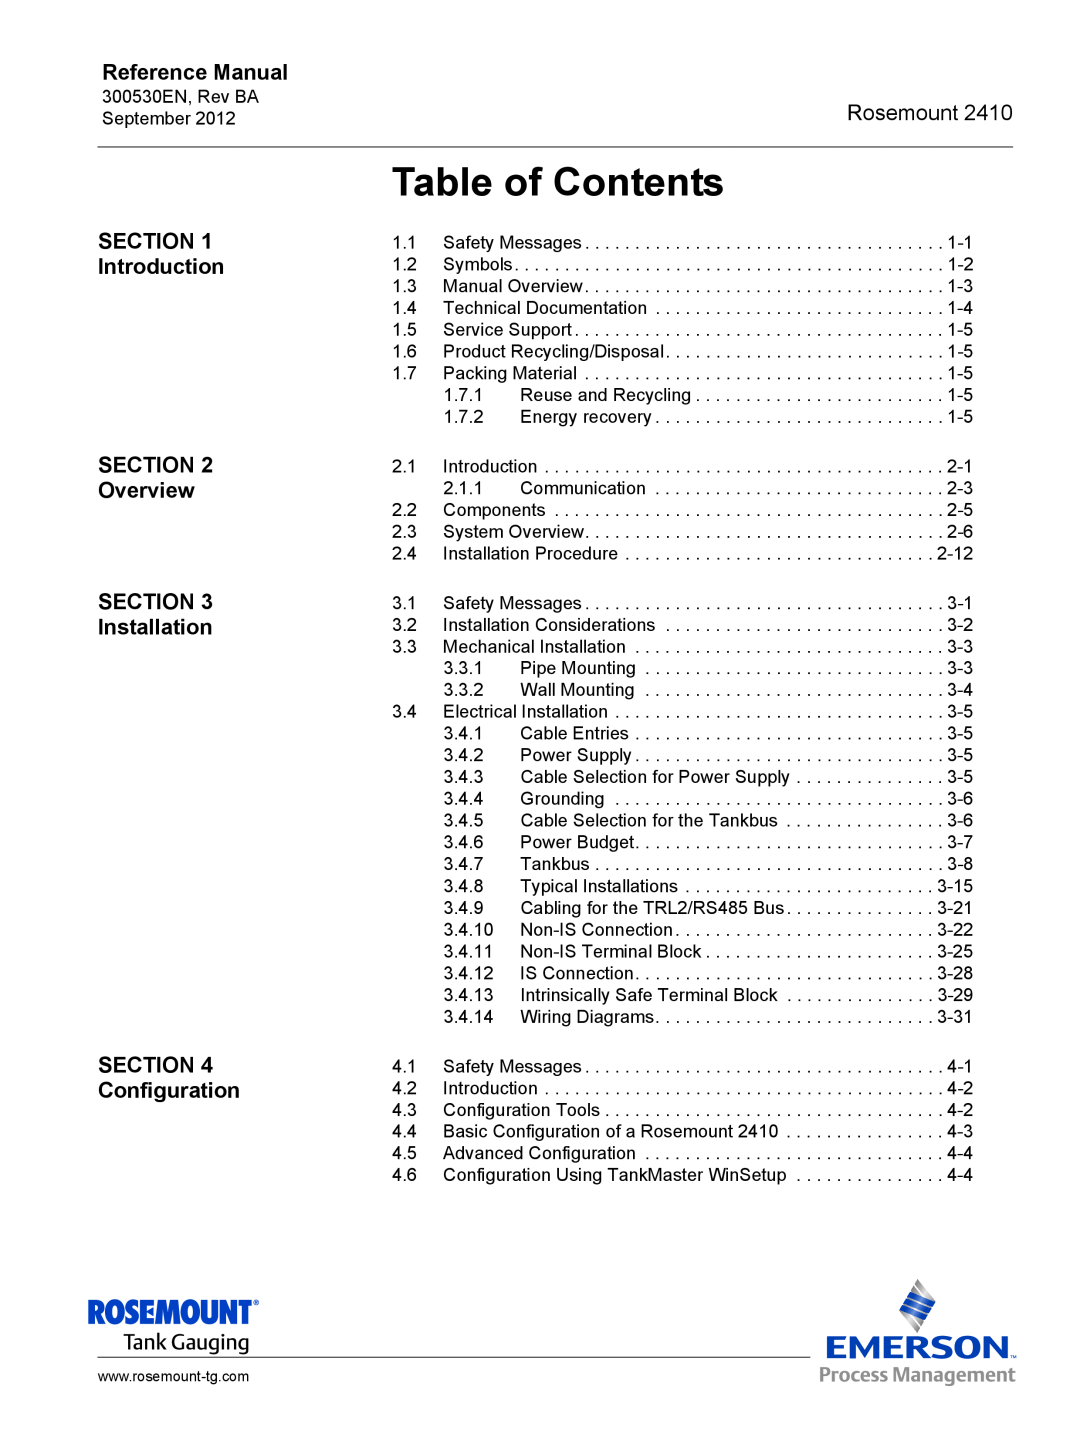 Emerson Process Management Rosemount 2410 manual Table of Contents, Introduction Overview Installation, Configuration 